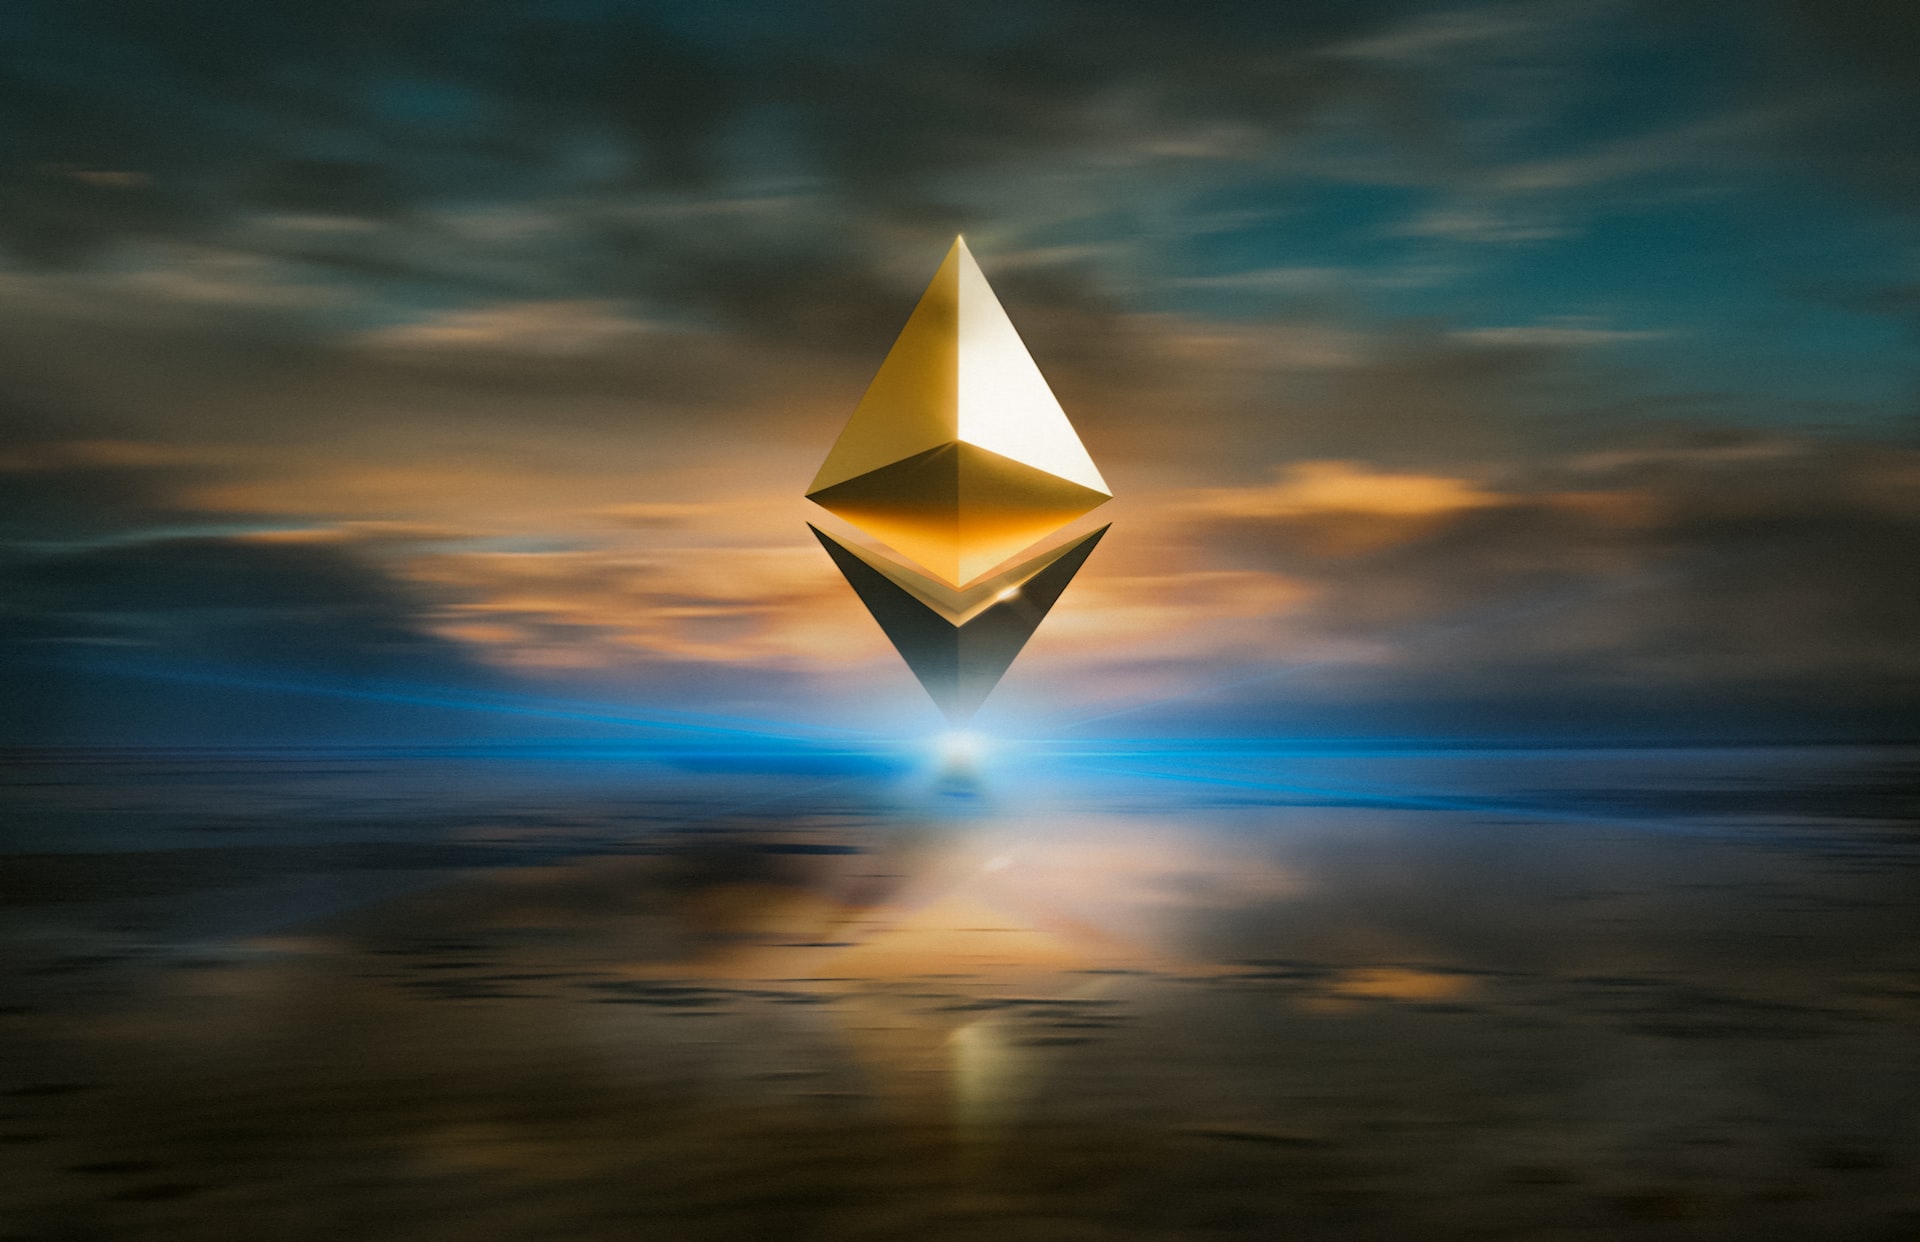 Ethereum Merge can be seen on the horizon